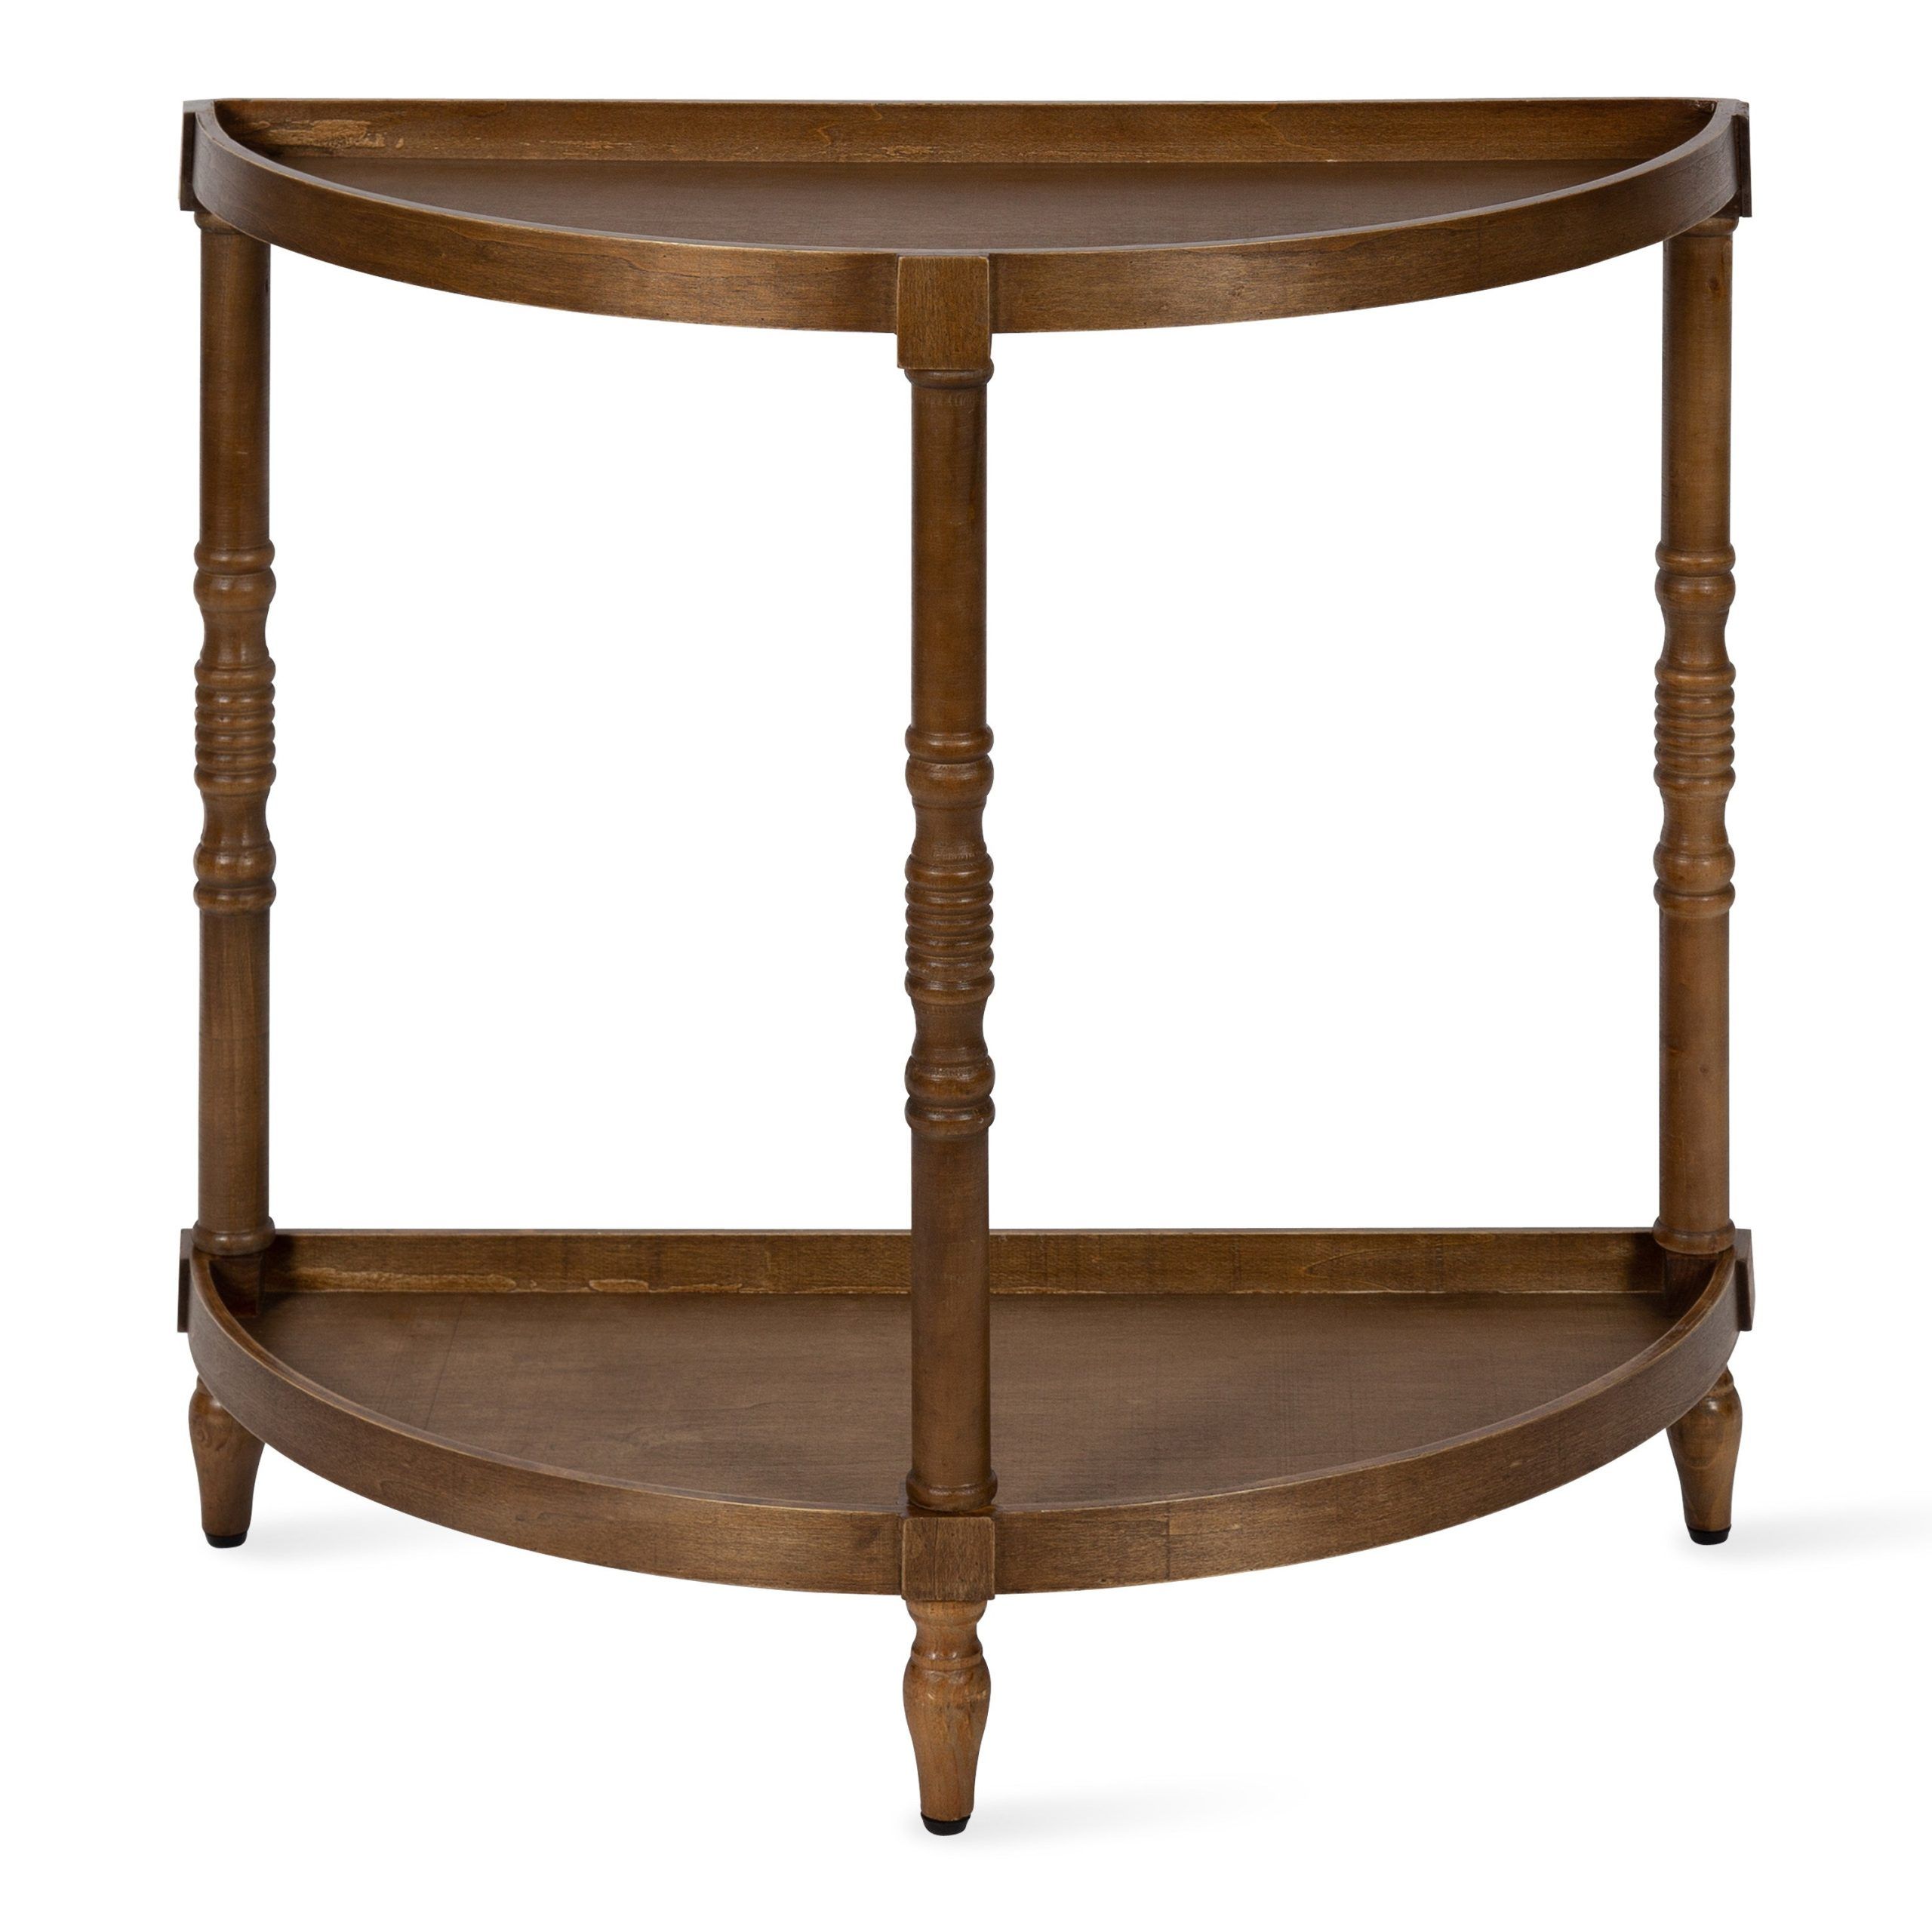 Kate And Laurel Bellport Farmhouse Demilune Console Table, 30 X 14 X 30 With Regard To Well Liked Kate And Laurel Bellport Farmhouse Drink Tables (View 15 of 15)